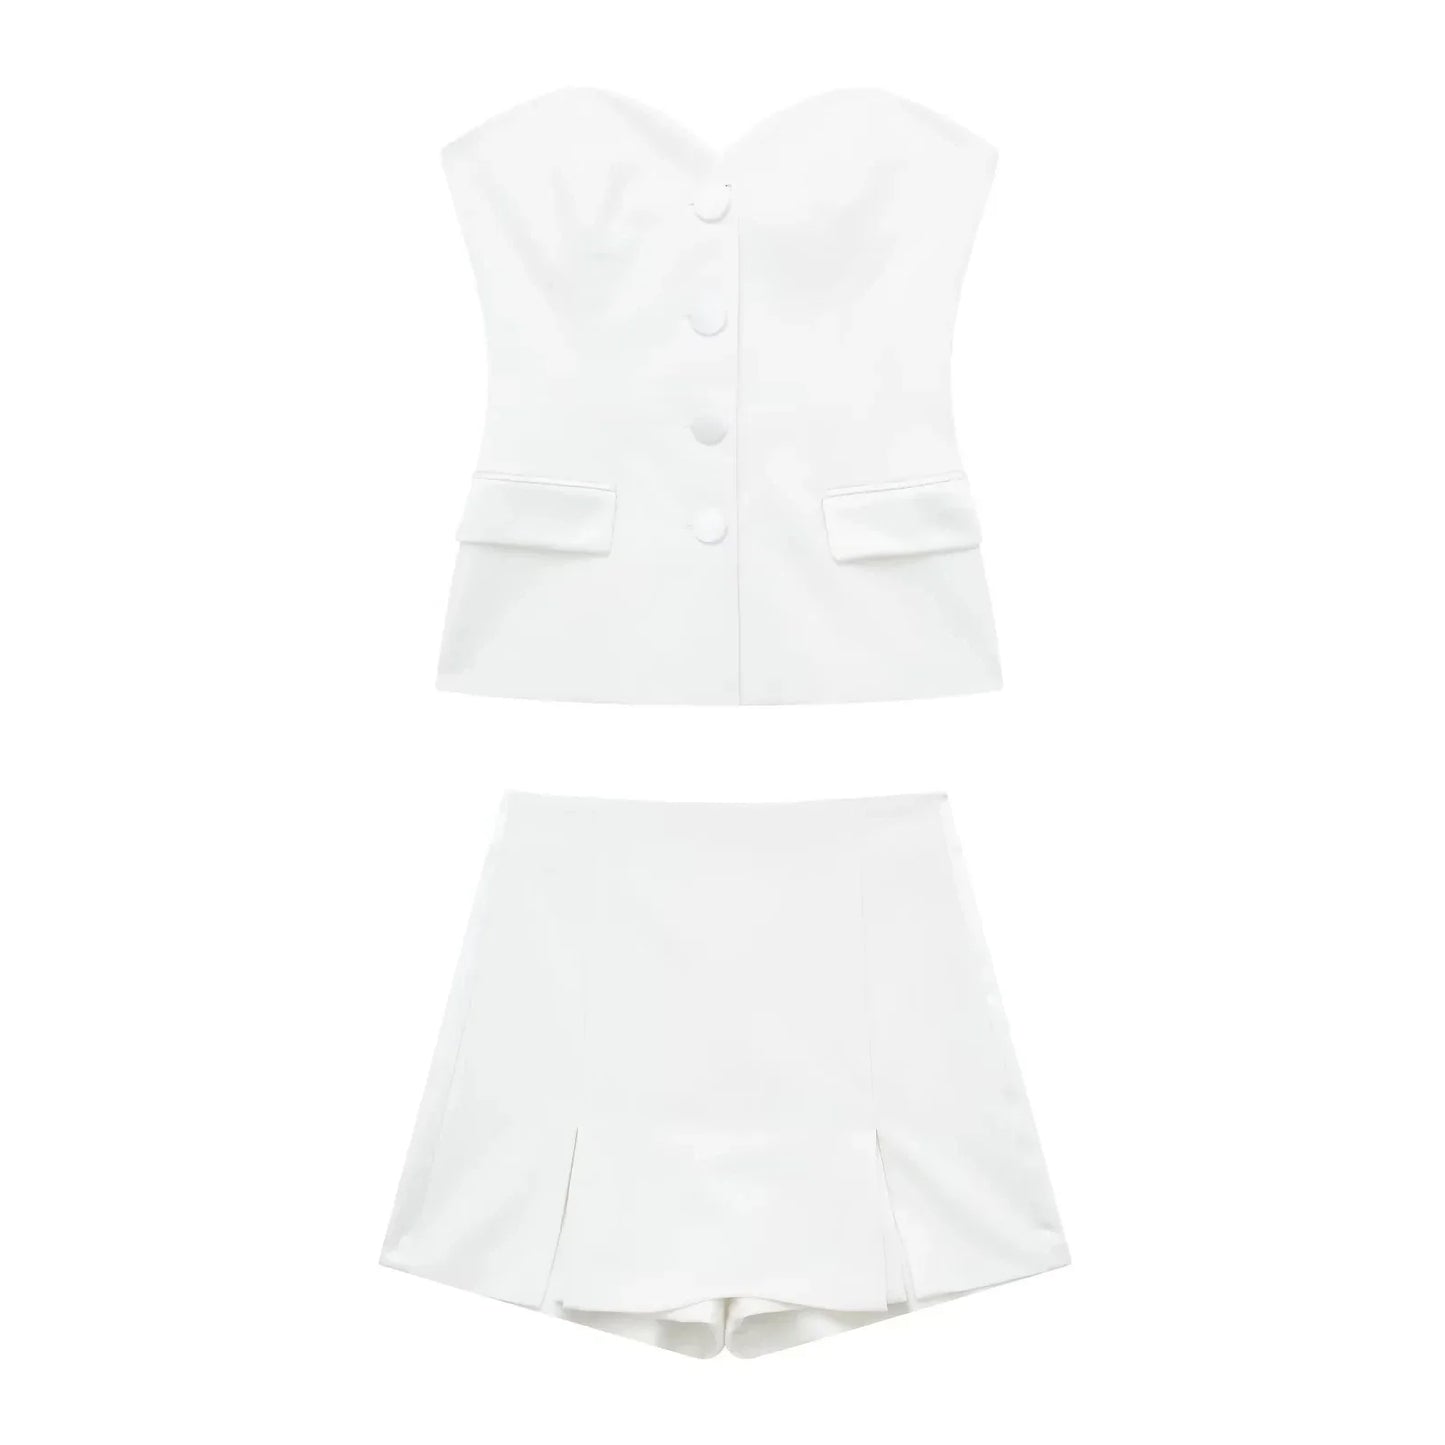 Shorts Sets- The Must-Have Cocktail Outfit for Every Woman- White set- Pekosa Women Fashion